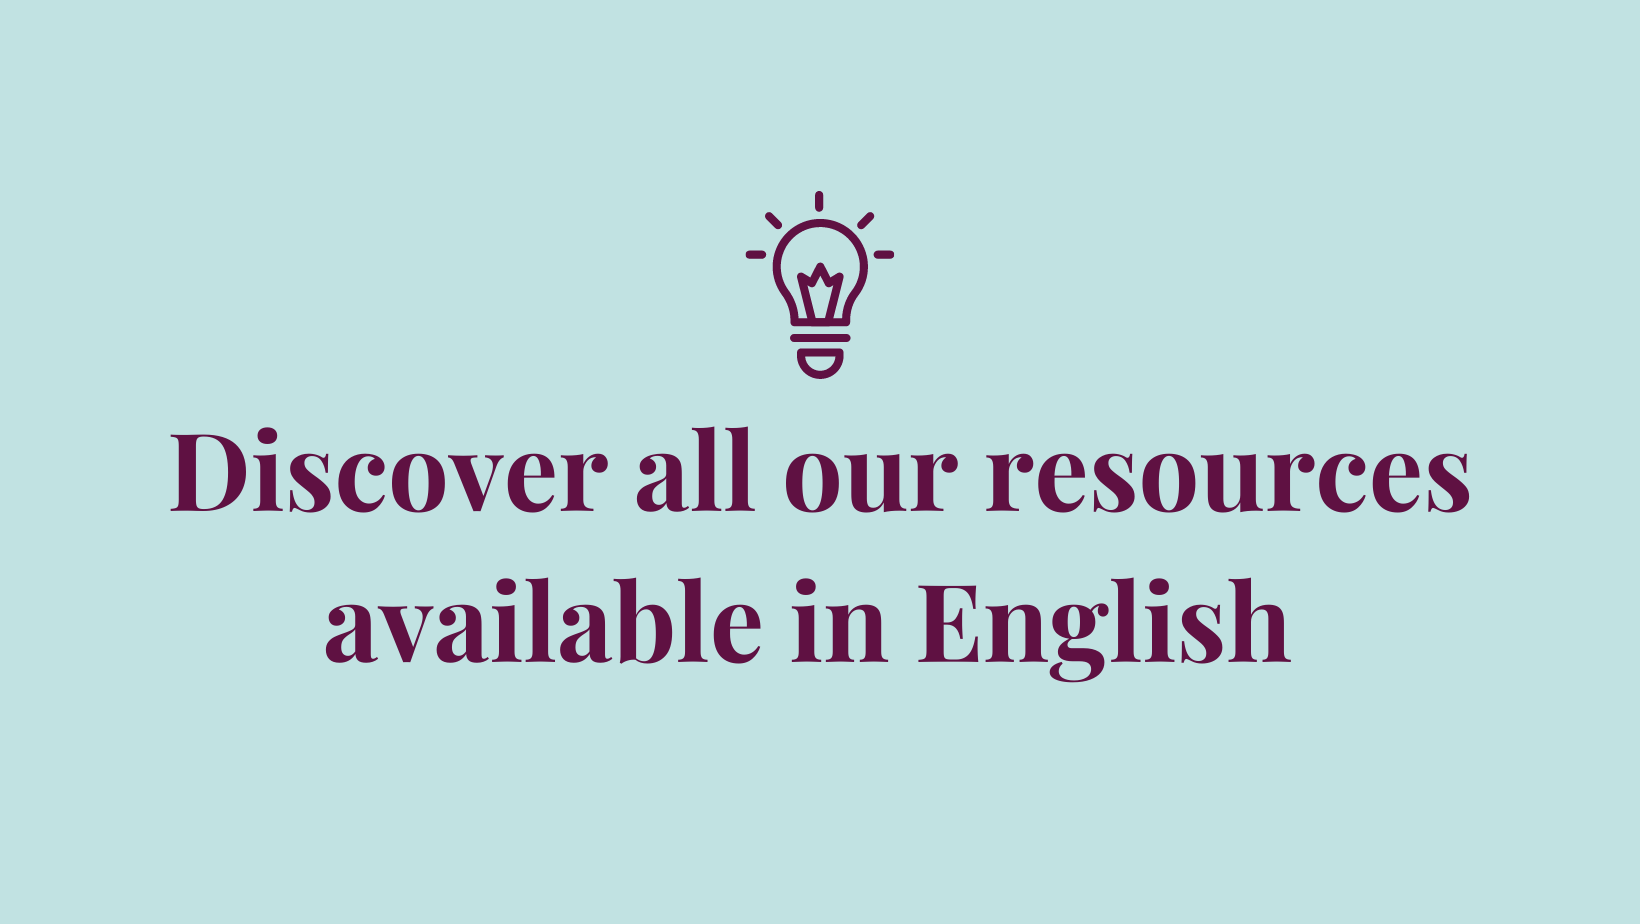 Discover all our resources available in English